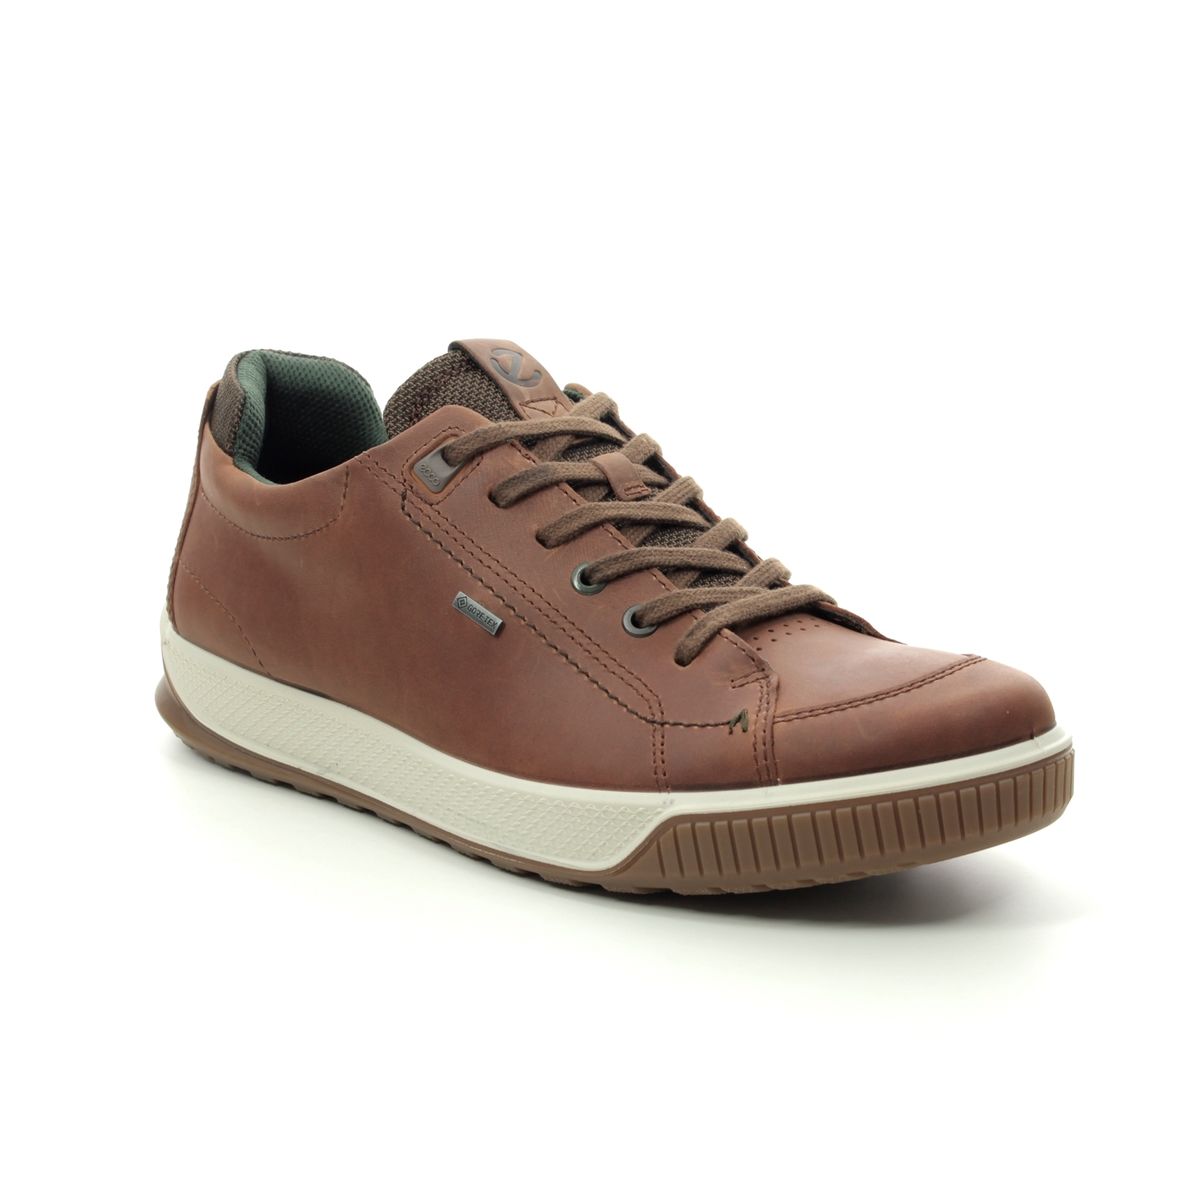 ECCO Byway Tred Gore Tan Leather casual shoes